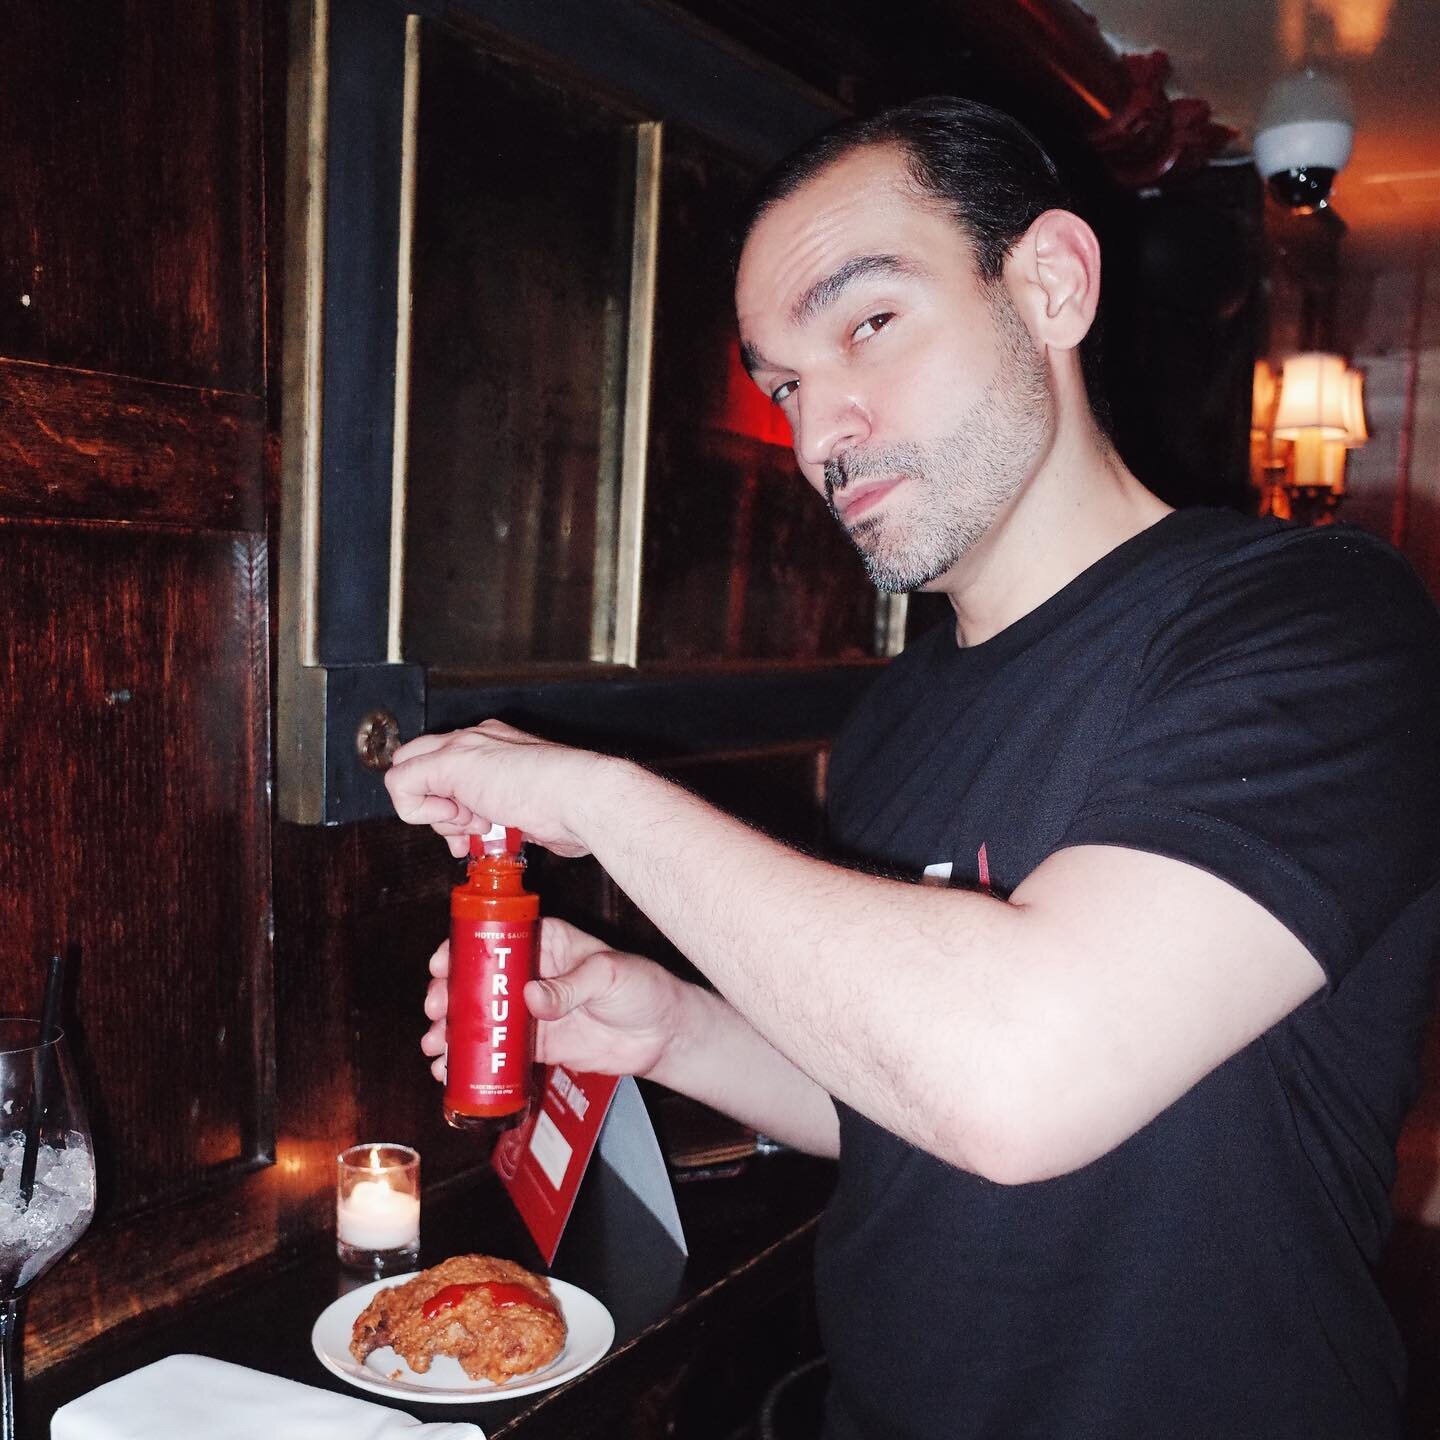 Happy #JaviDay everyone! @javiermofficial using his day to keep the heat on the AIDS fight with @red